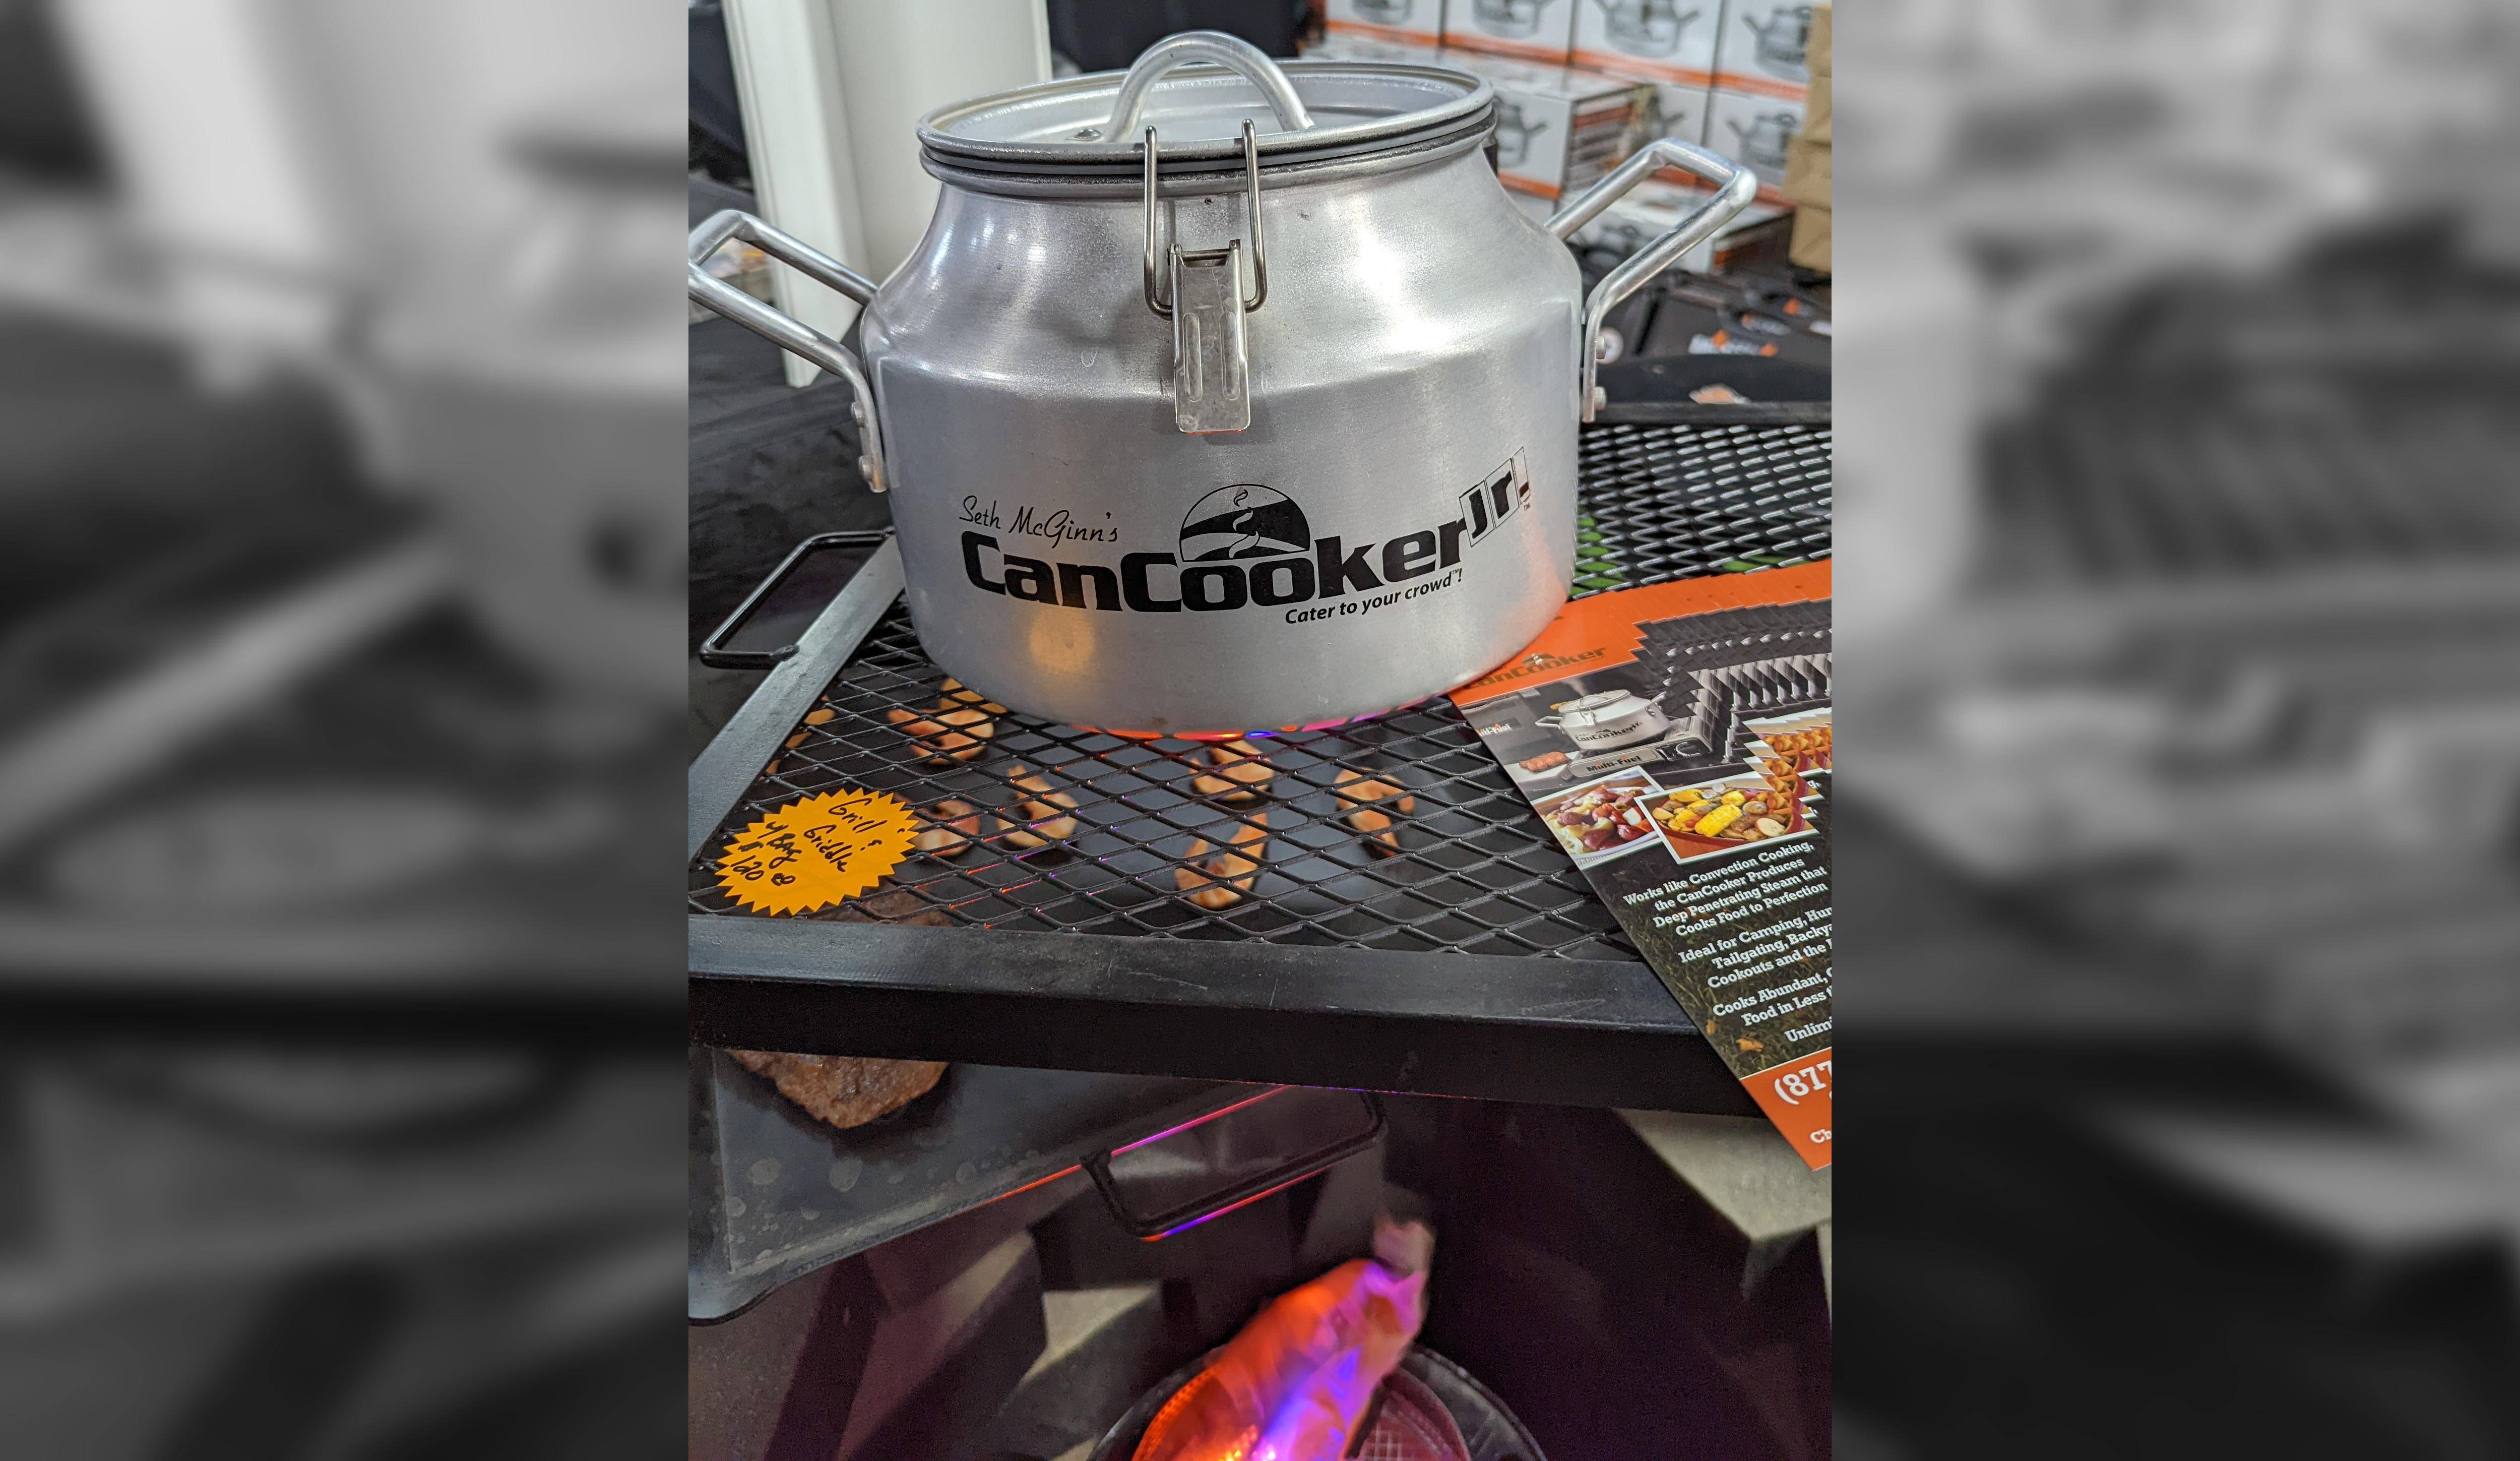 https://www.alloutdoor.com/wp-content/uploads/2022/02/Cancooker-campfire-grill-fire-can-cooker-gravity-grill.png